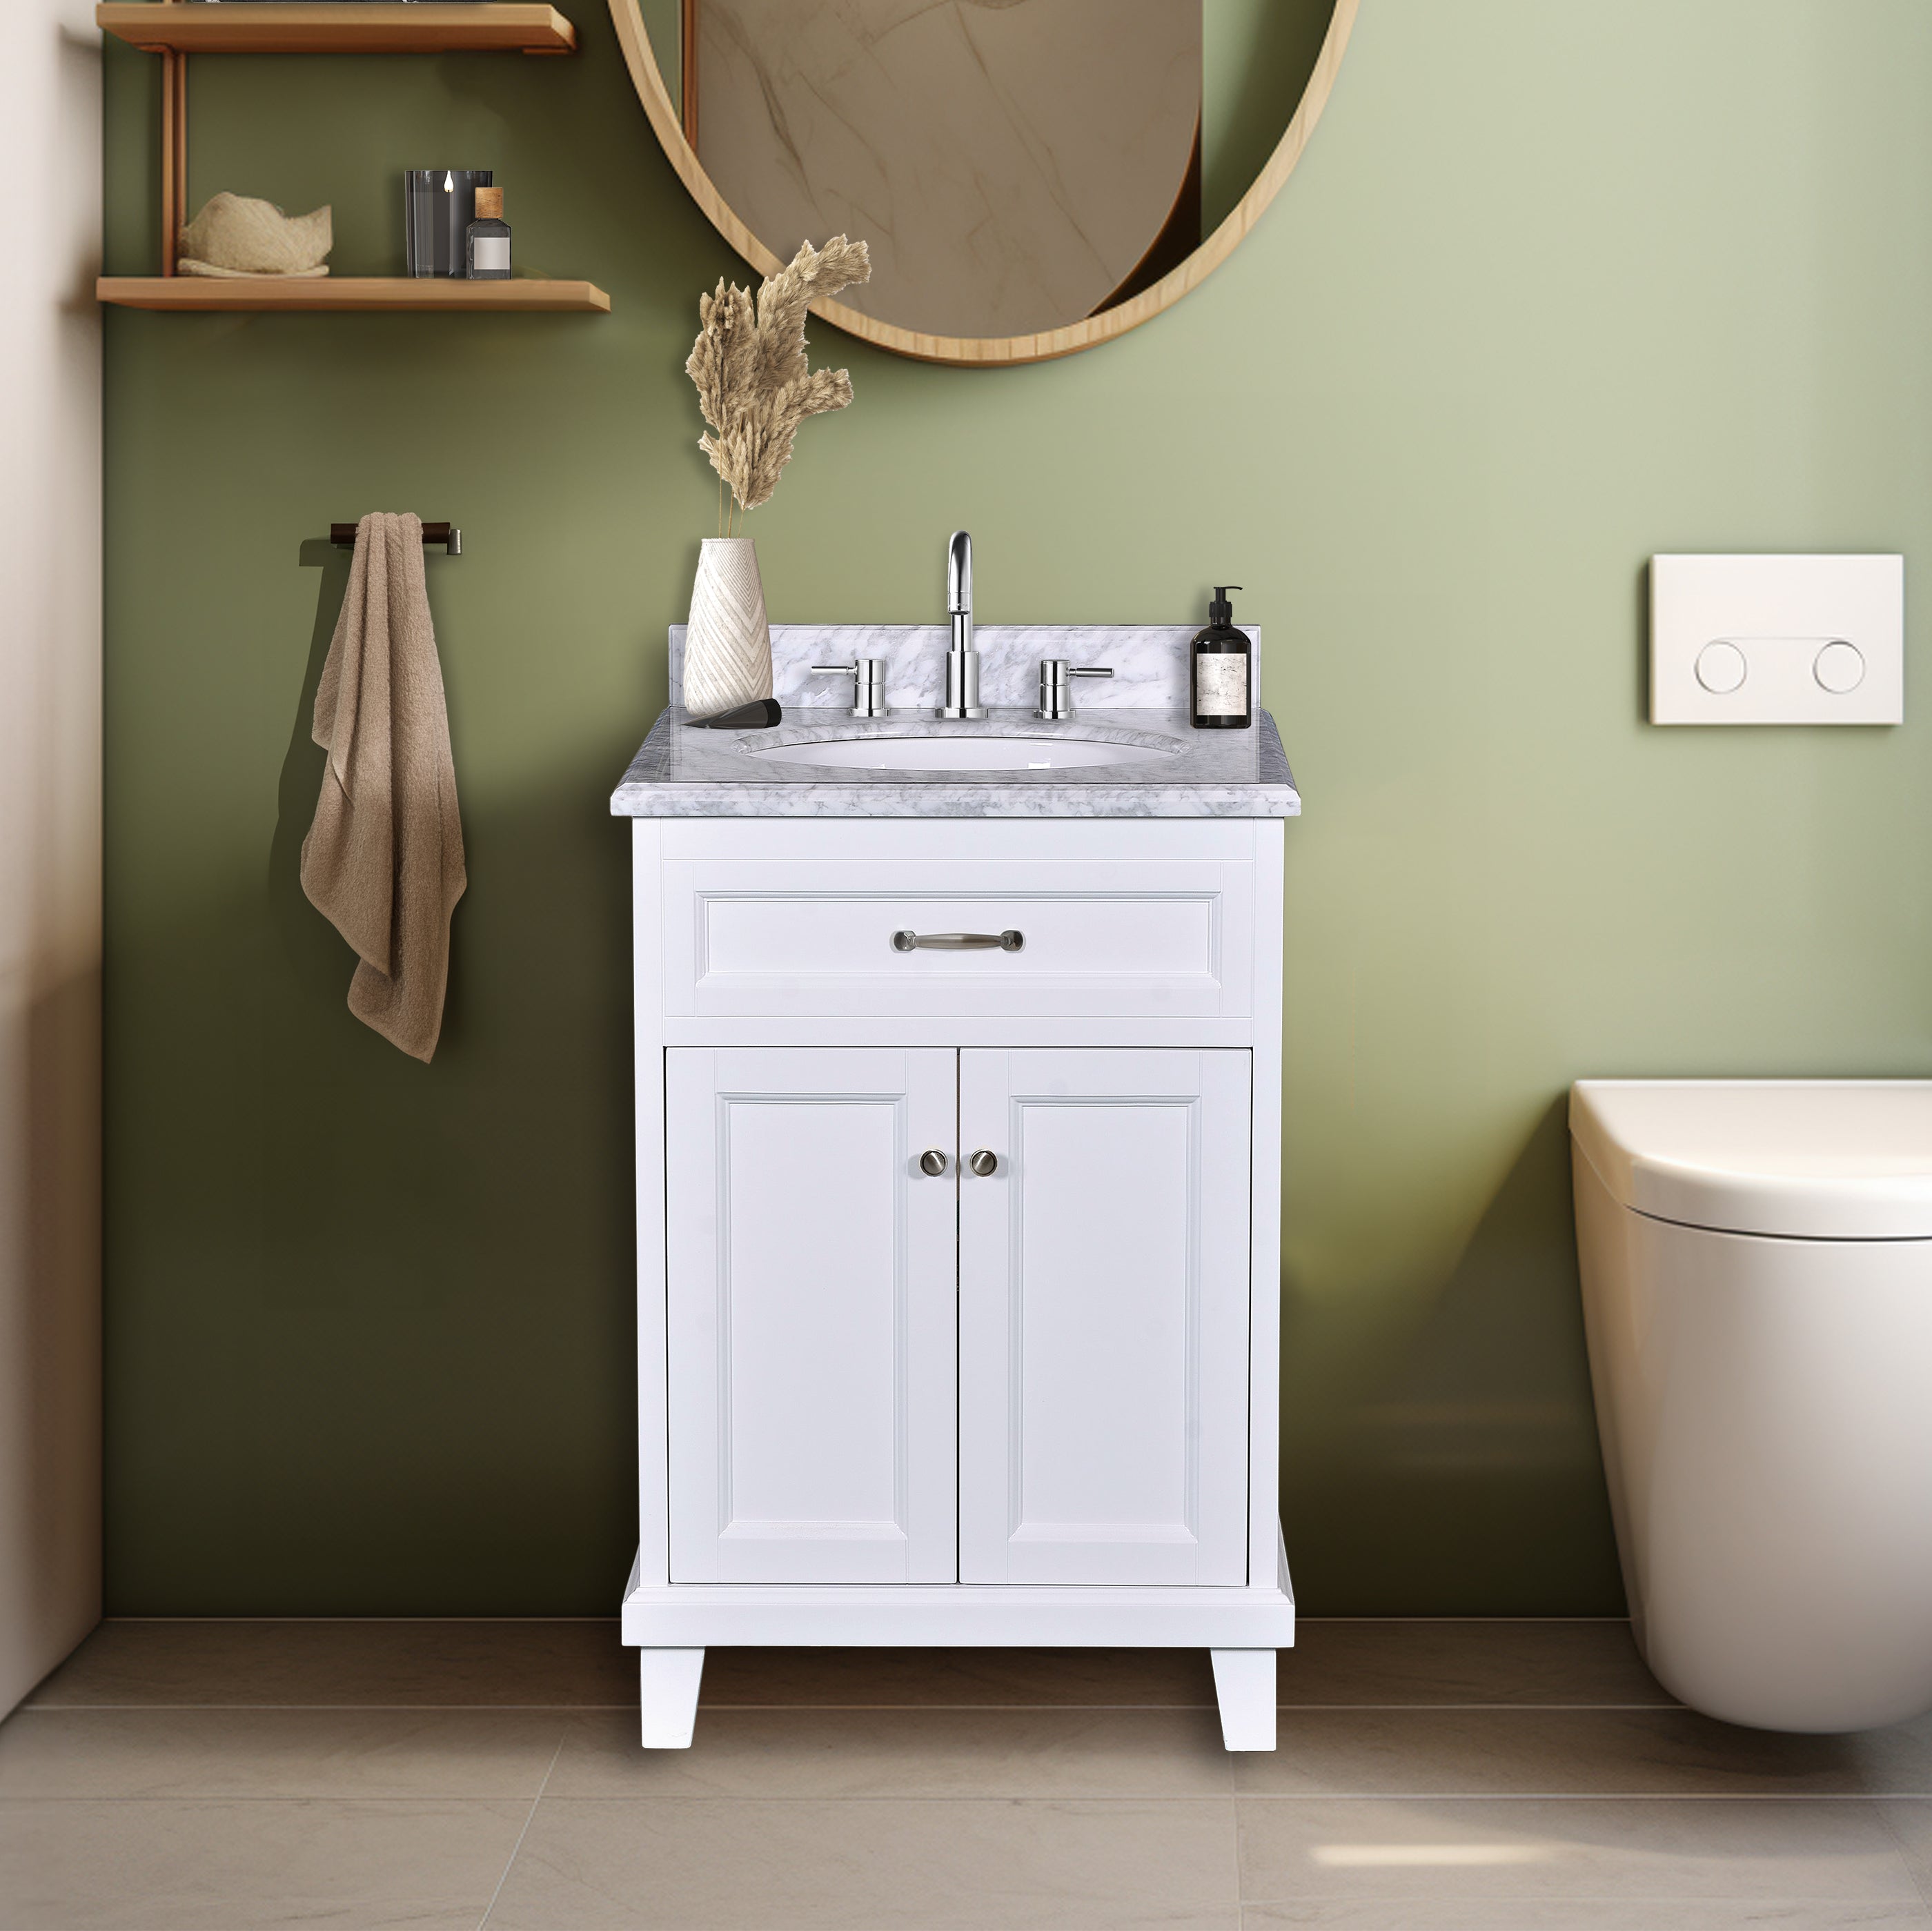 Bathroom Vanity in White with Solid Wood & Carrara Marble Top - Available in 3 sizes - Dreamwerks